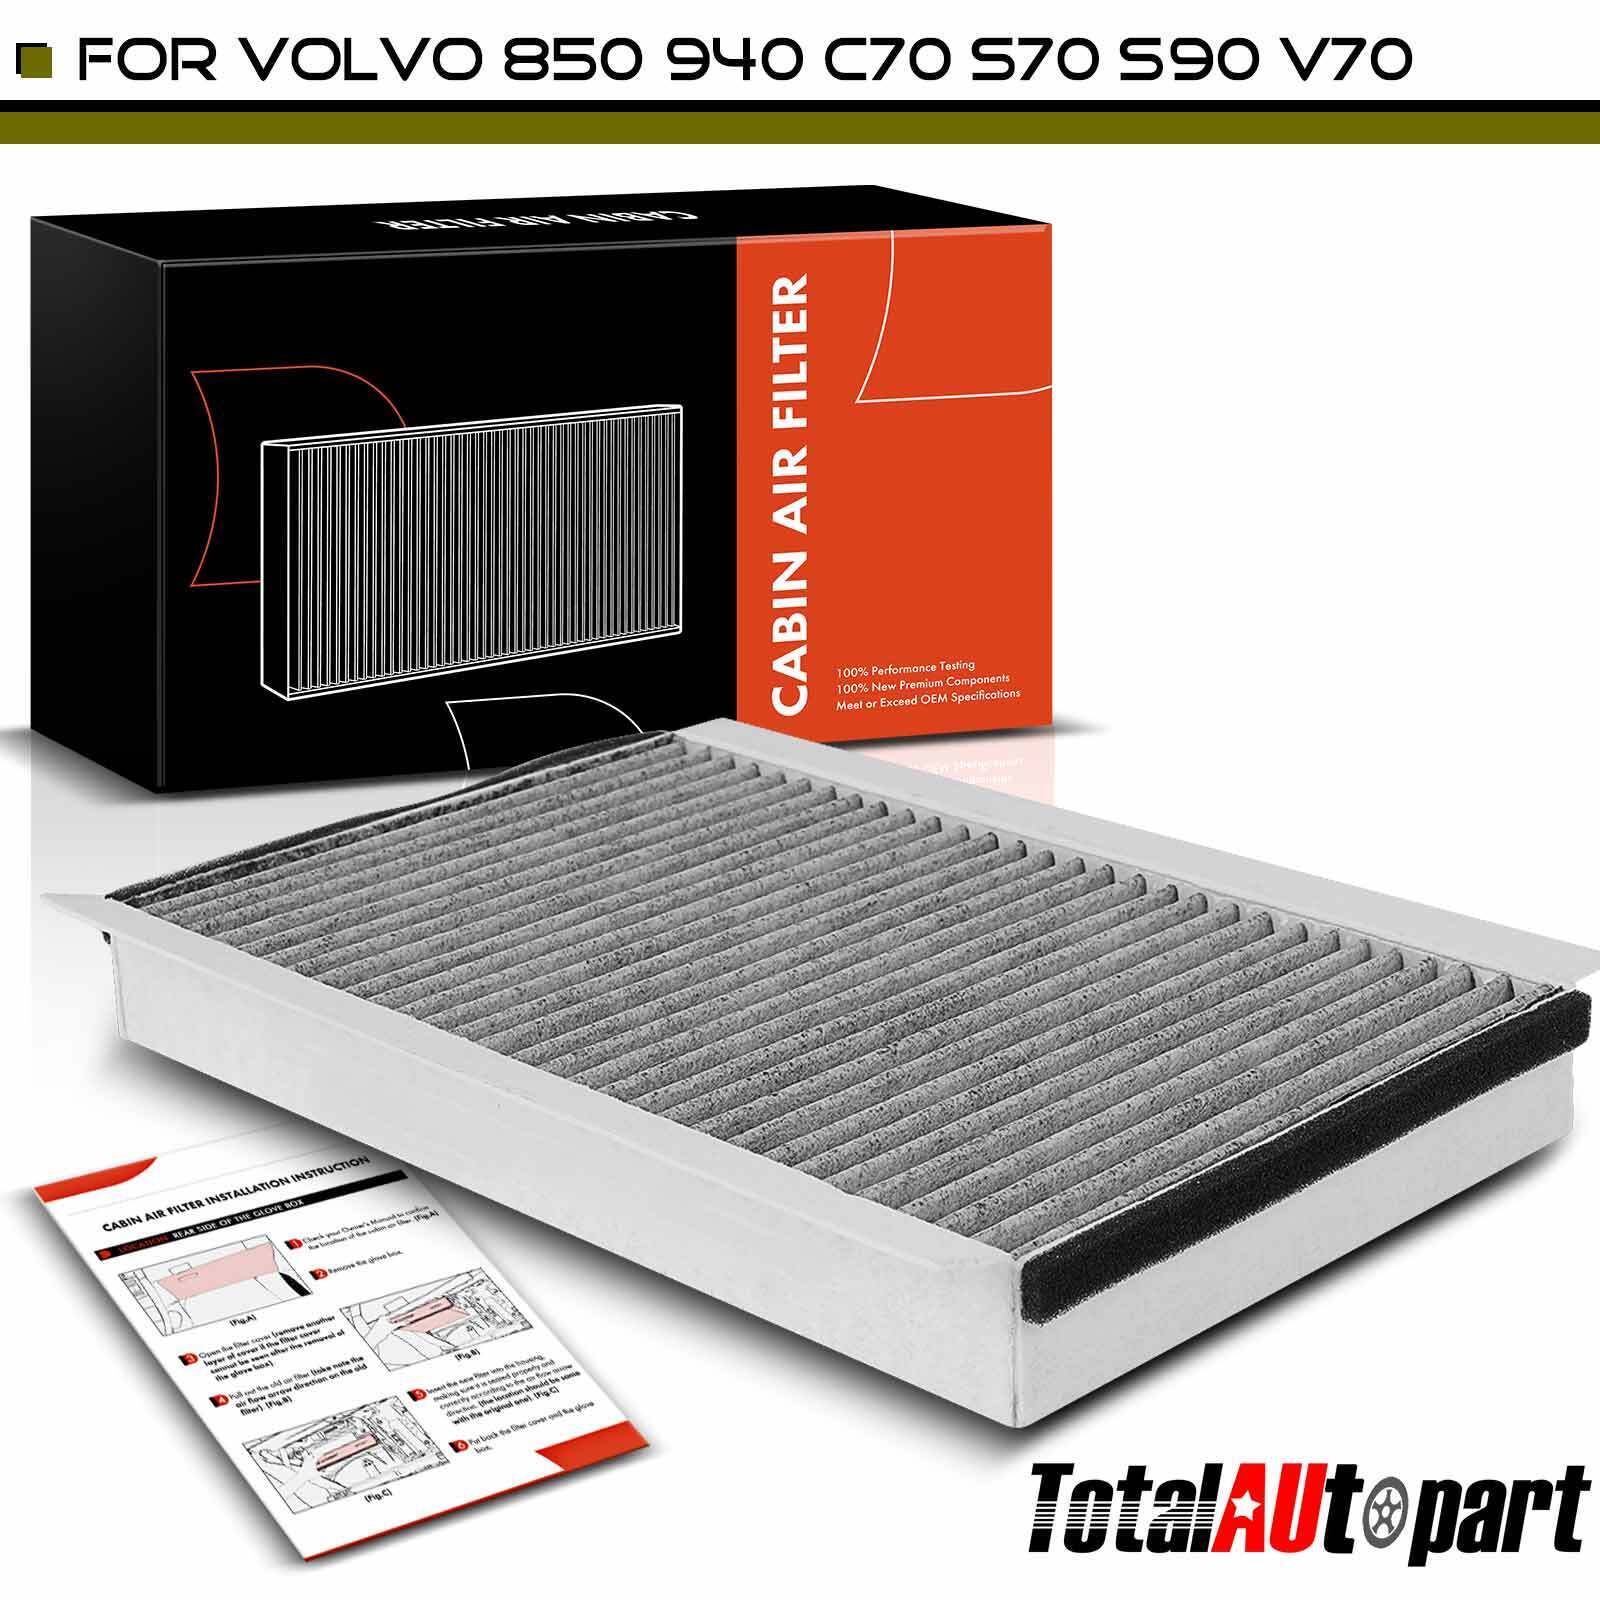 Activated Carbon Cabin Air Filter for Volvo 850 940 C70 S70 S90 V70 V90 Front